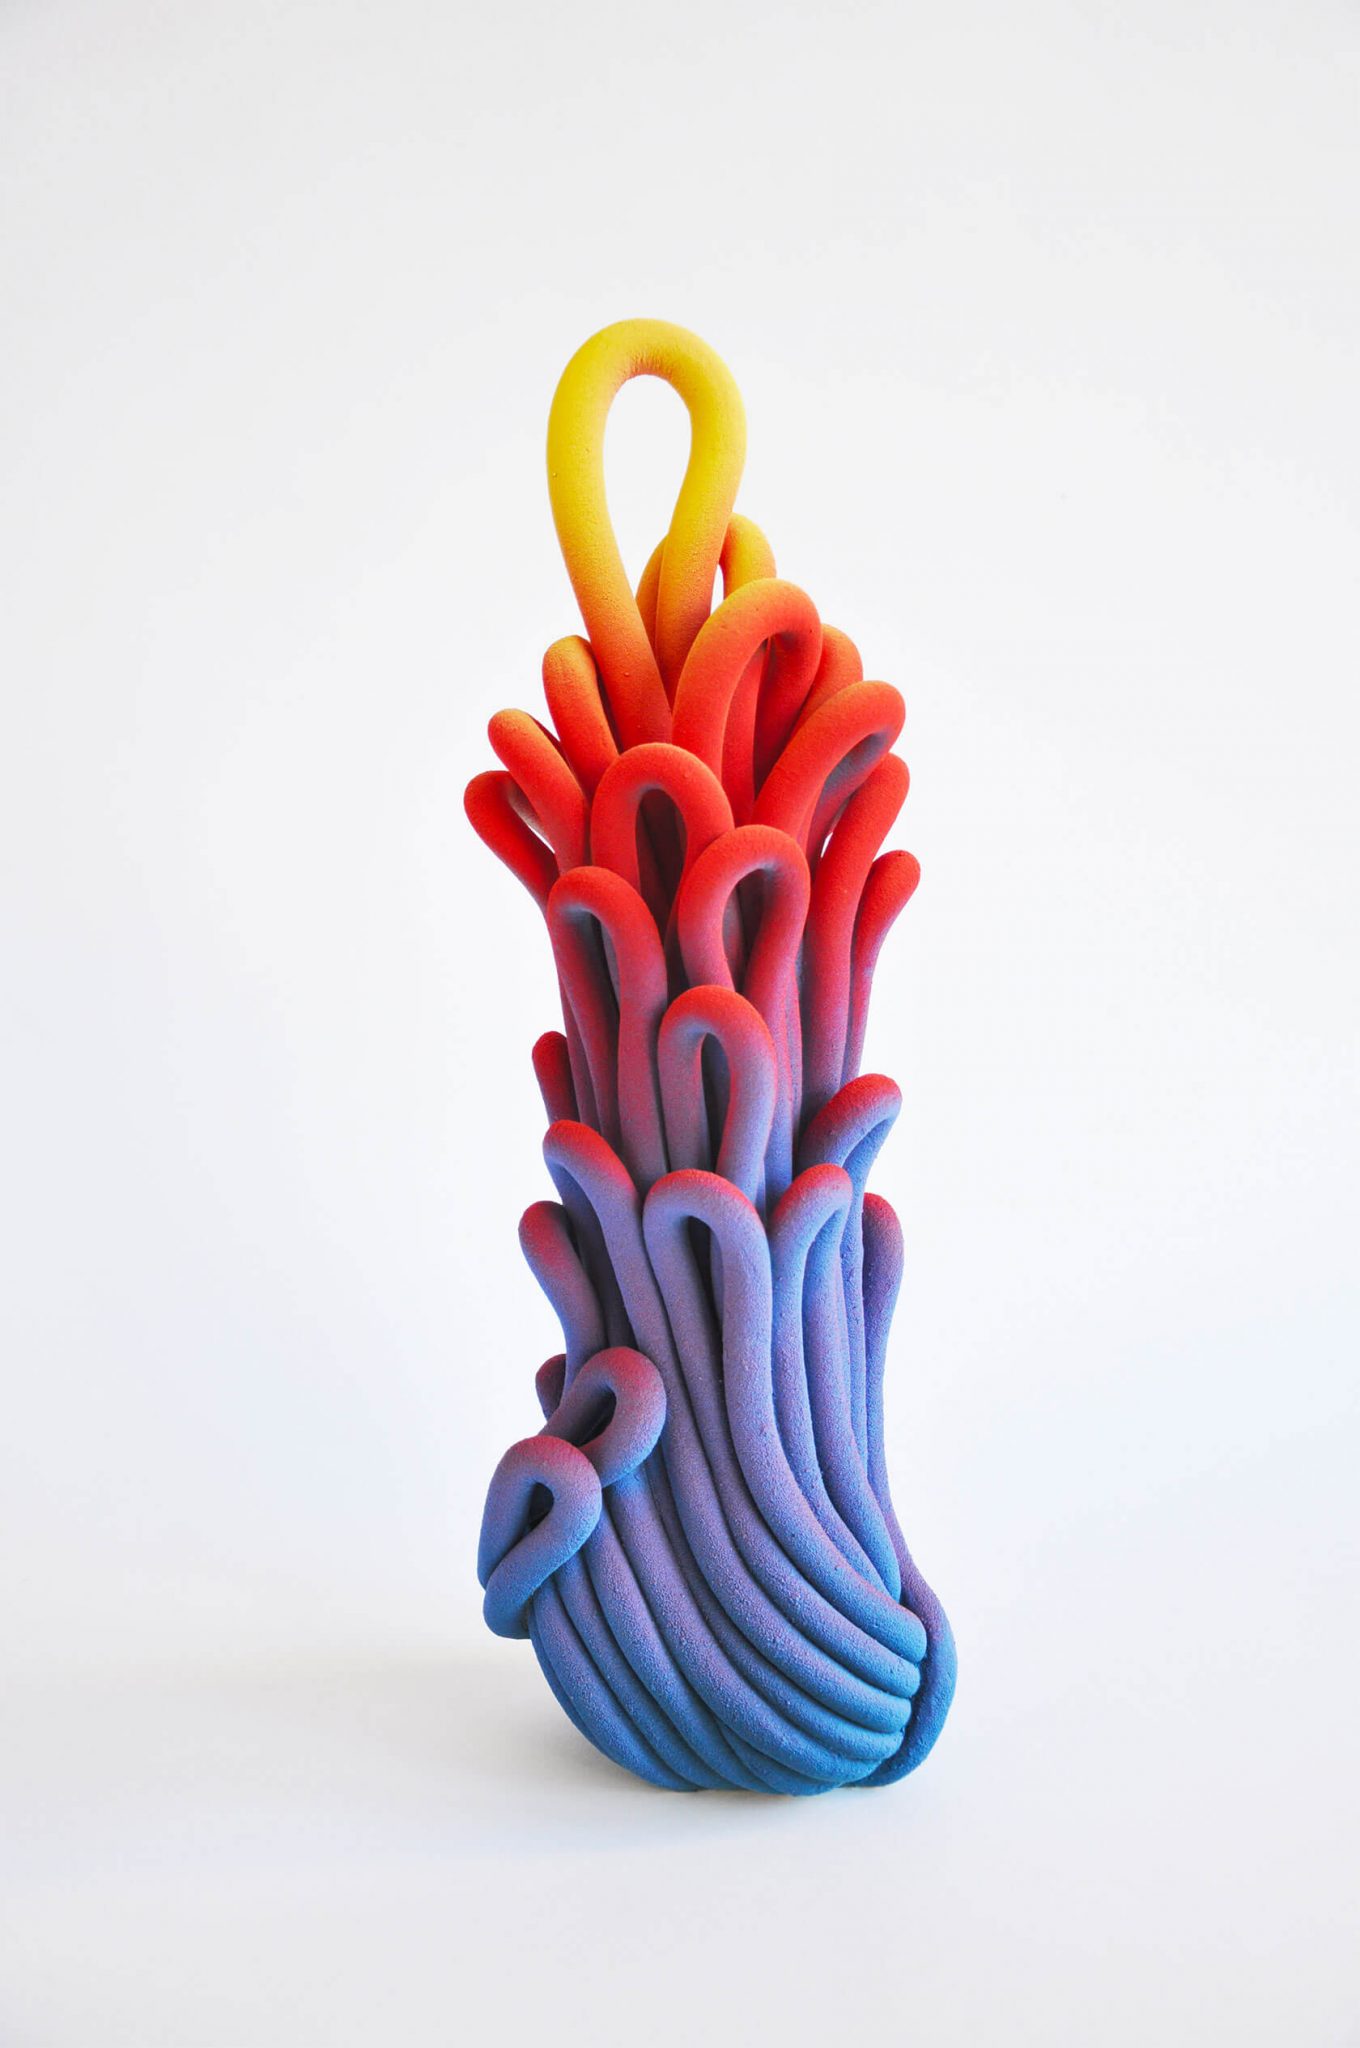 Organic Ceramic Sculptures by Claire Lindner | Daily design inspiration ...